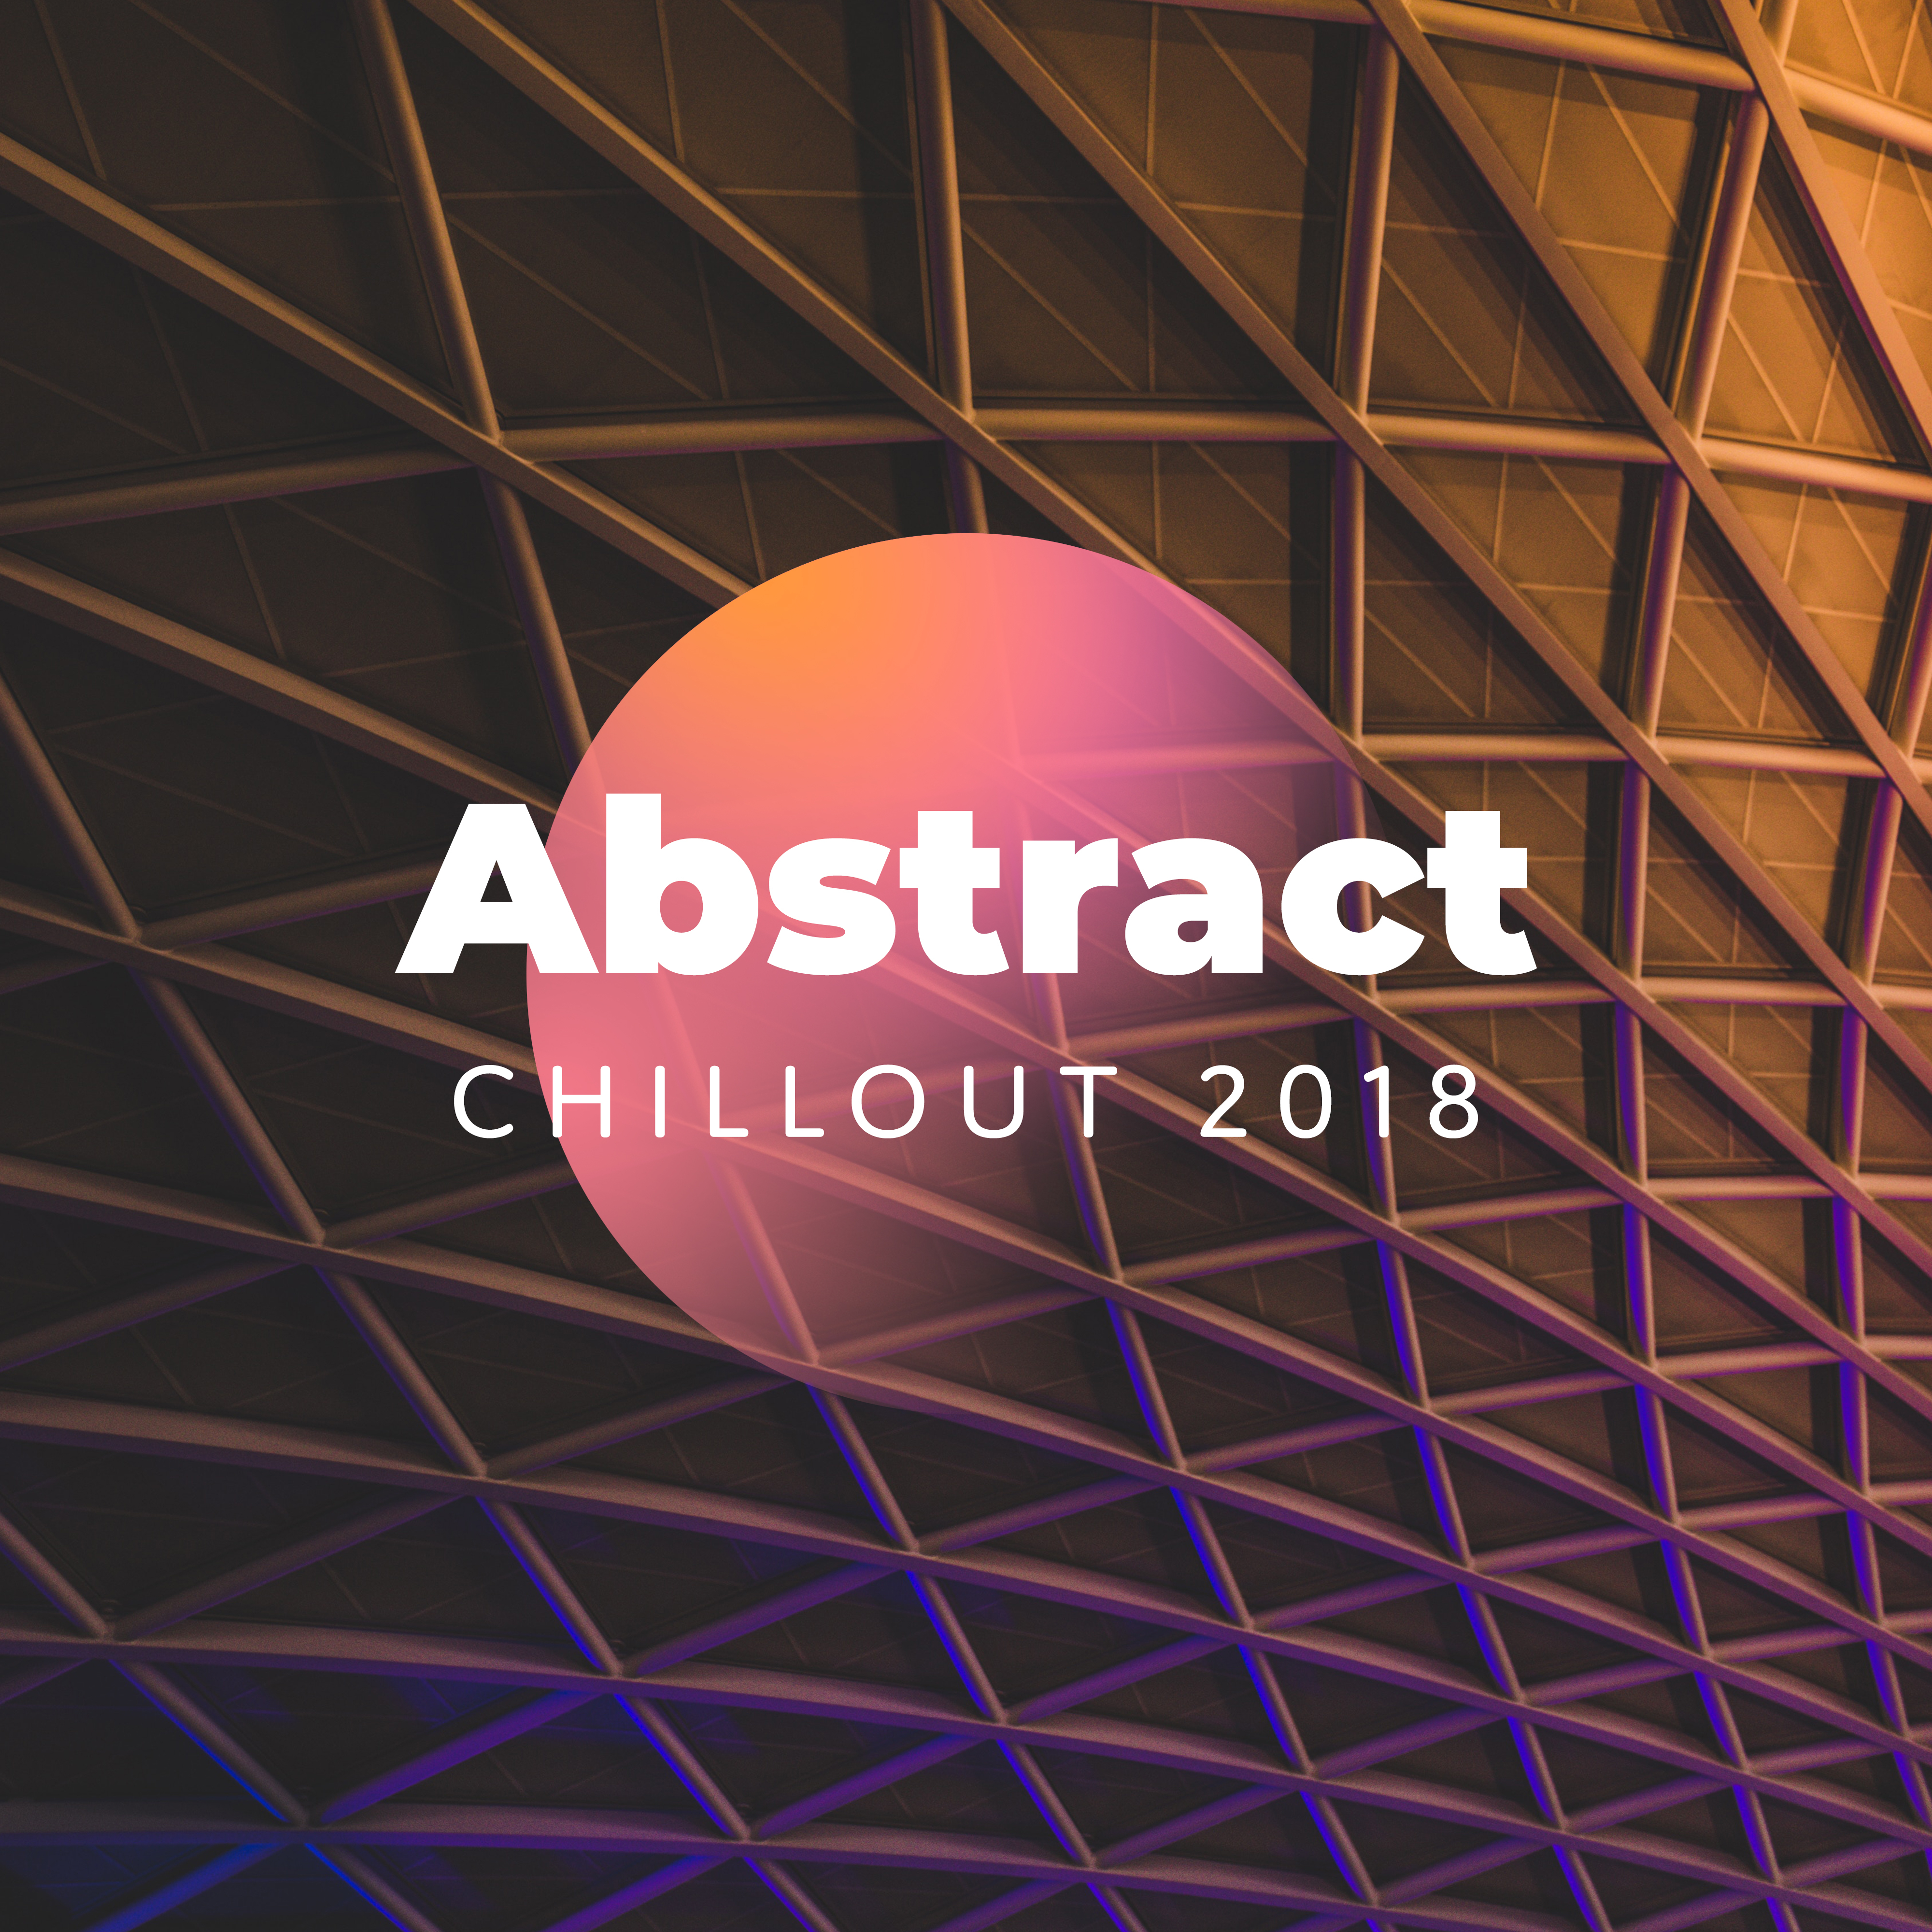 Abstract Chillout 2018